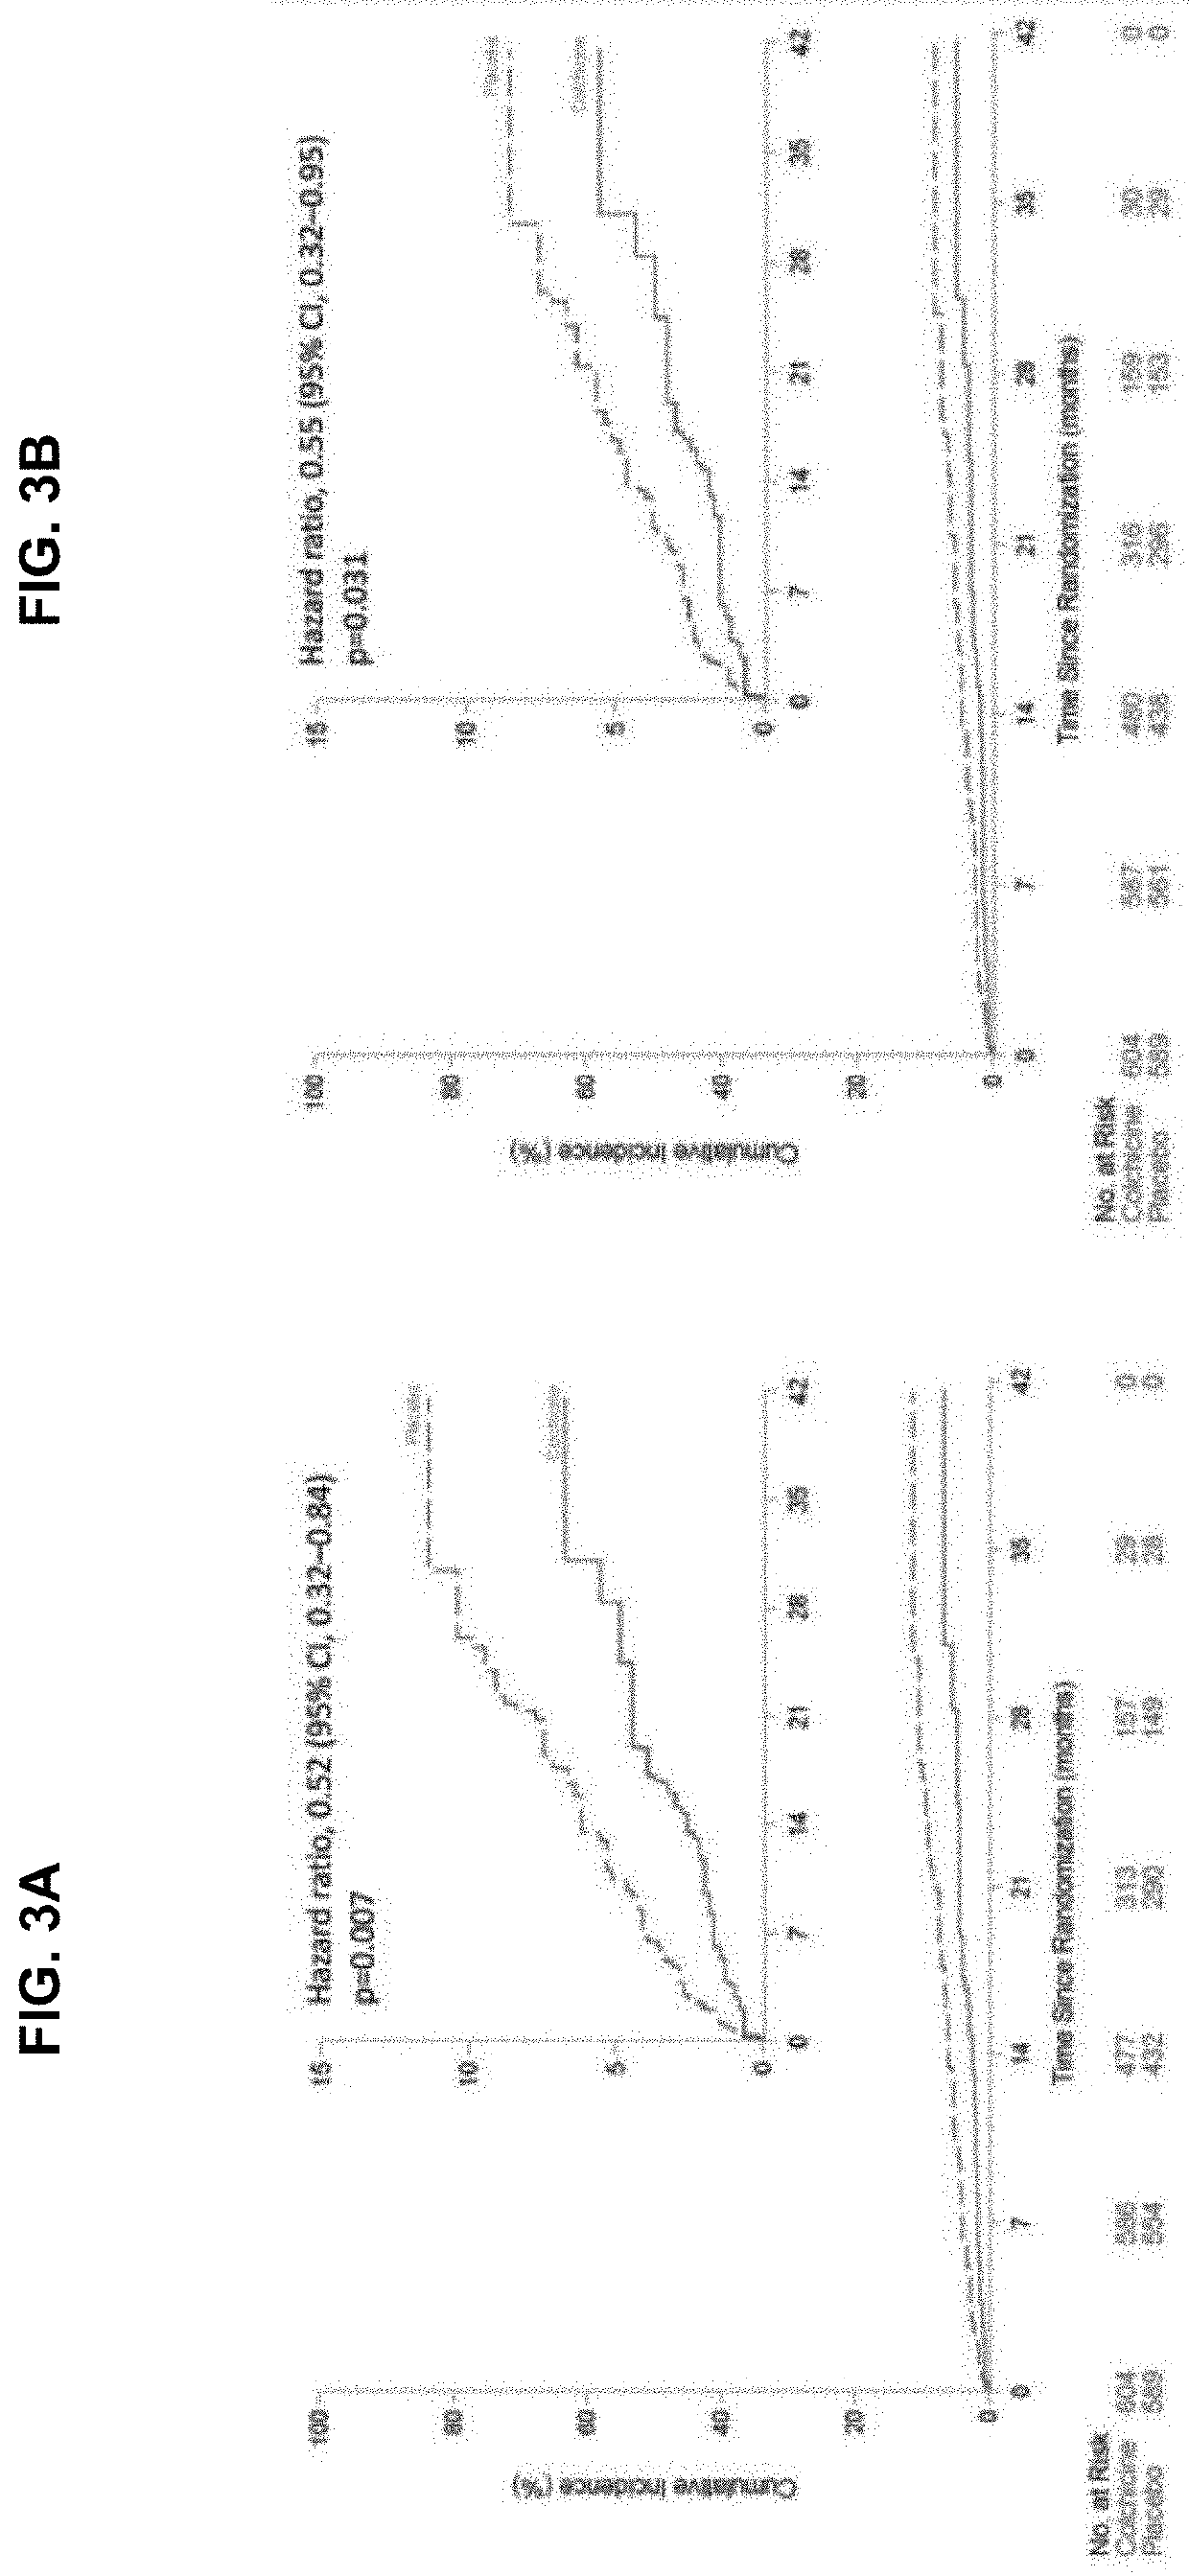 Early administration of low-dose colchicine after myocardial infarction